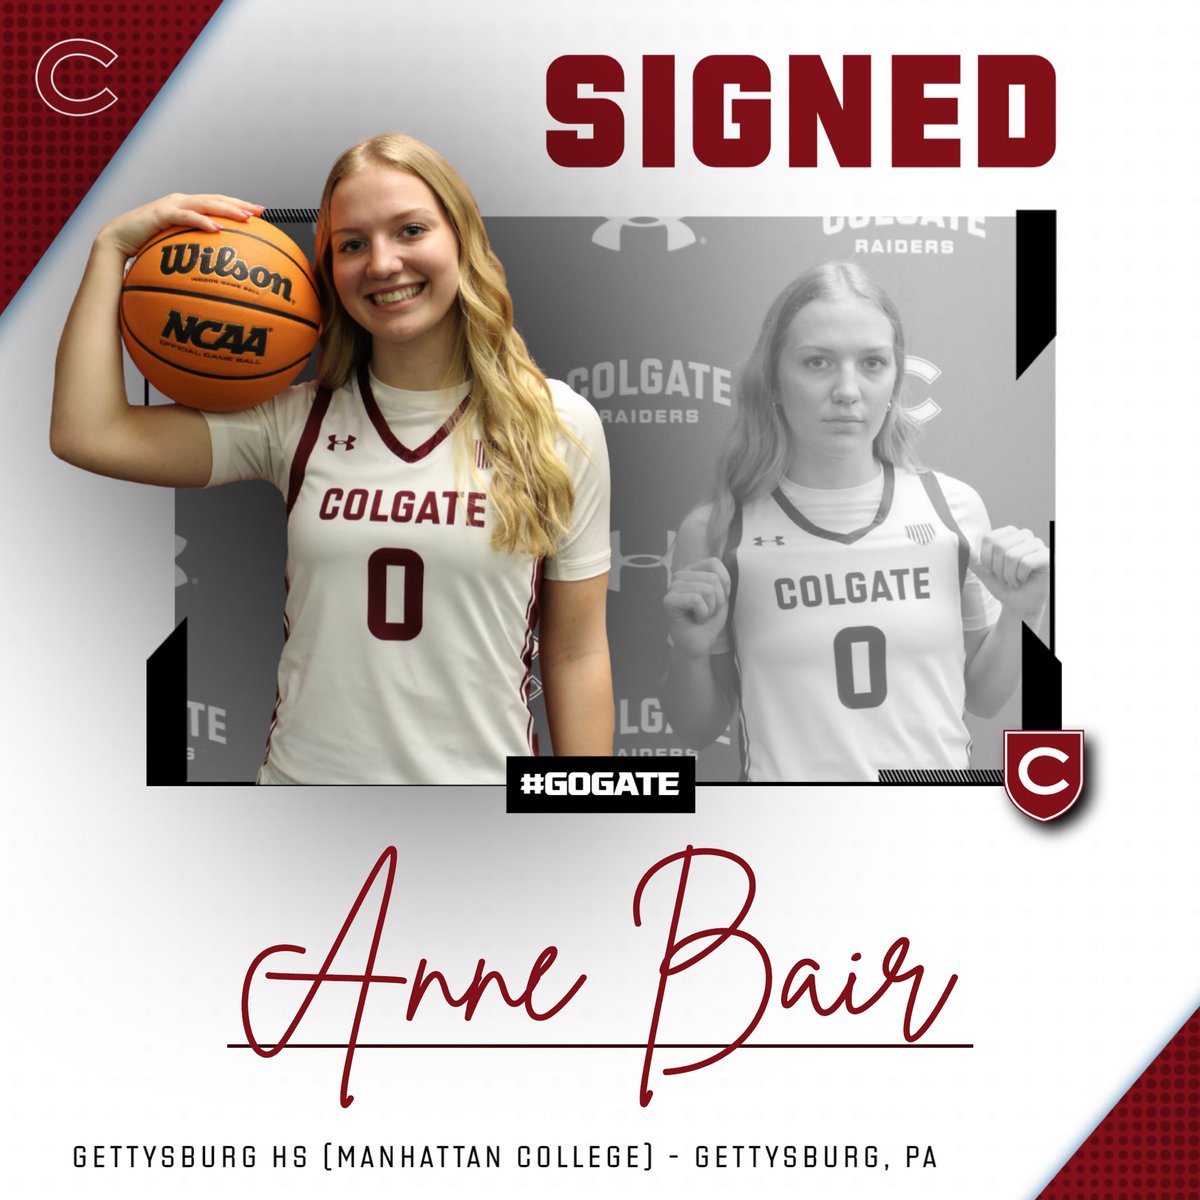 𝕊𝕀𝔾ℕ𝔼𝔻 | 𝔸𝕟𝕟𝕖 𝕓𝕒𝕚𝕣 Welcome to the family @annebair24 ! Excited to get to work 💪 #GoGate